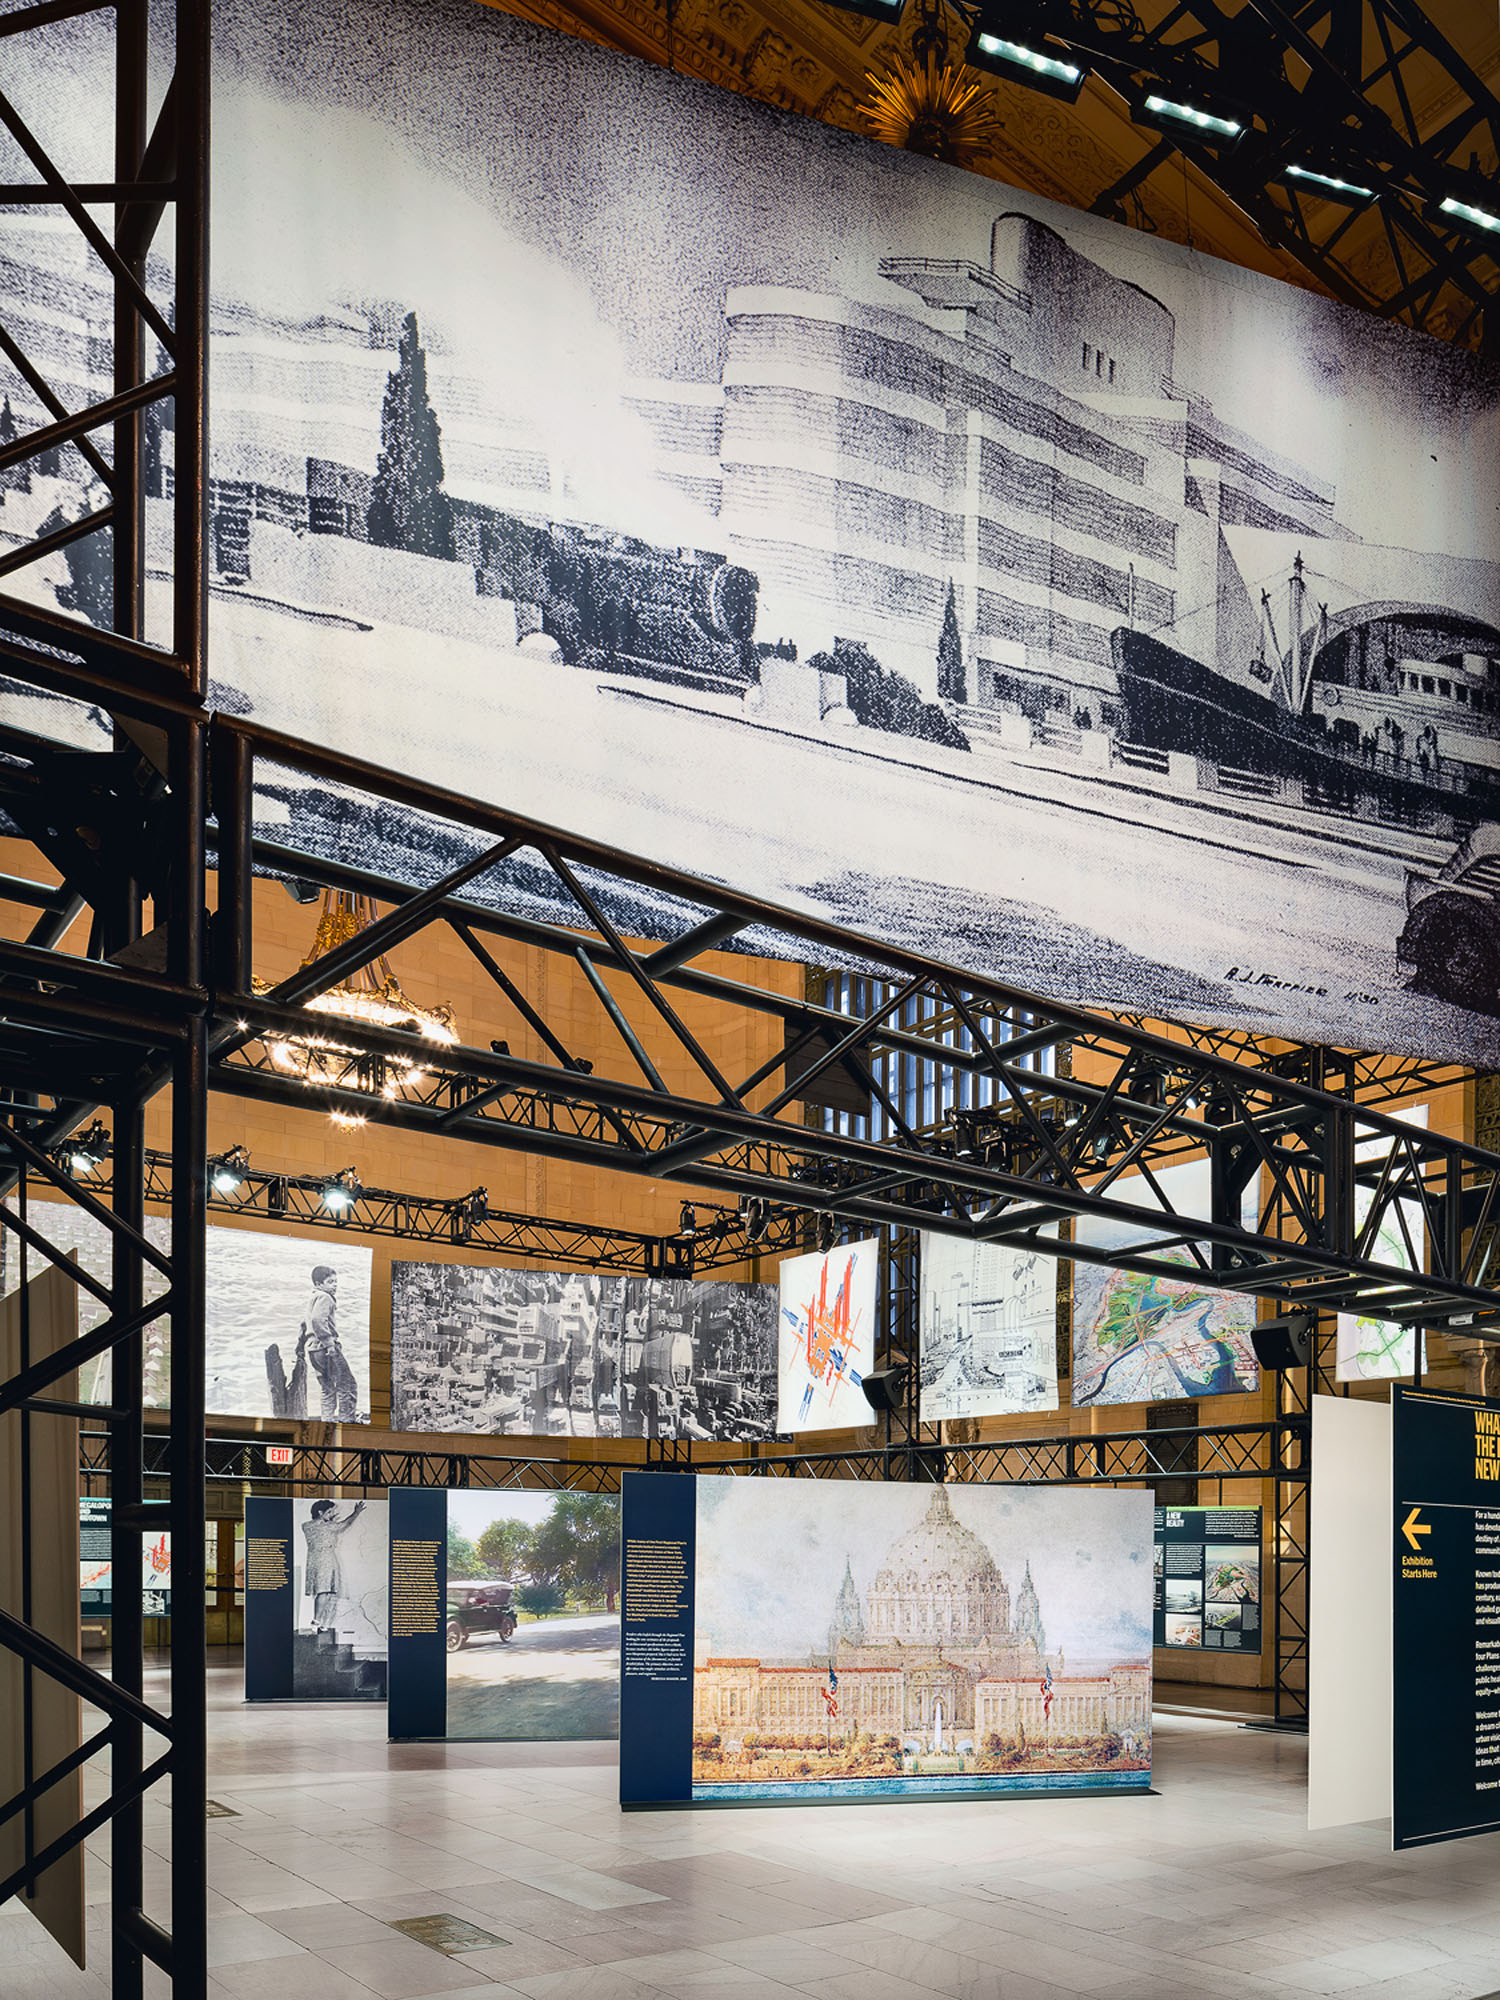 an image of an exhibition displaying historical documents from the Regional Plan Association